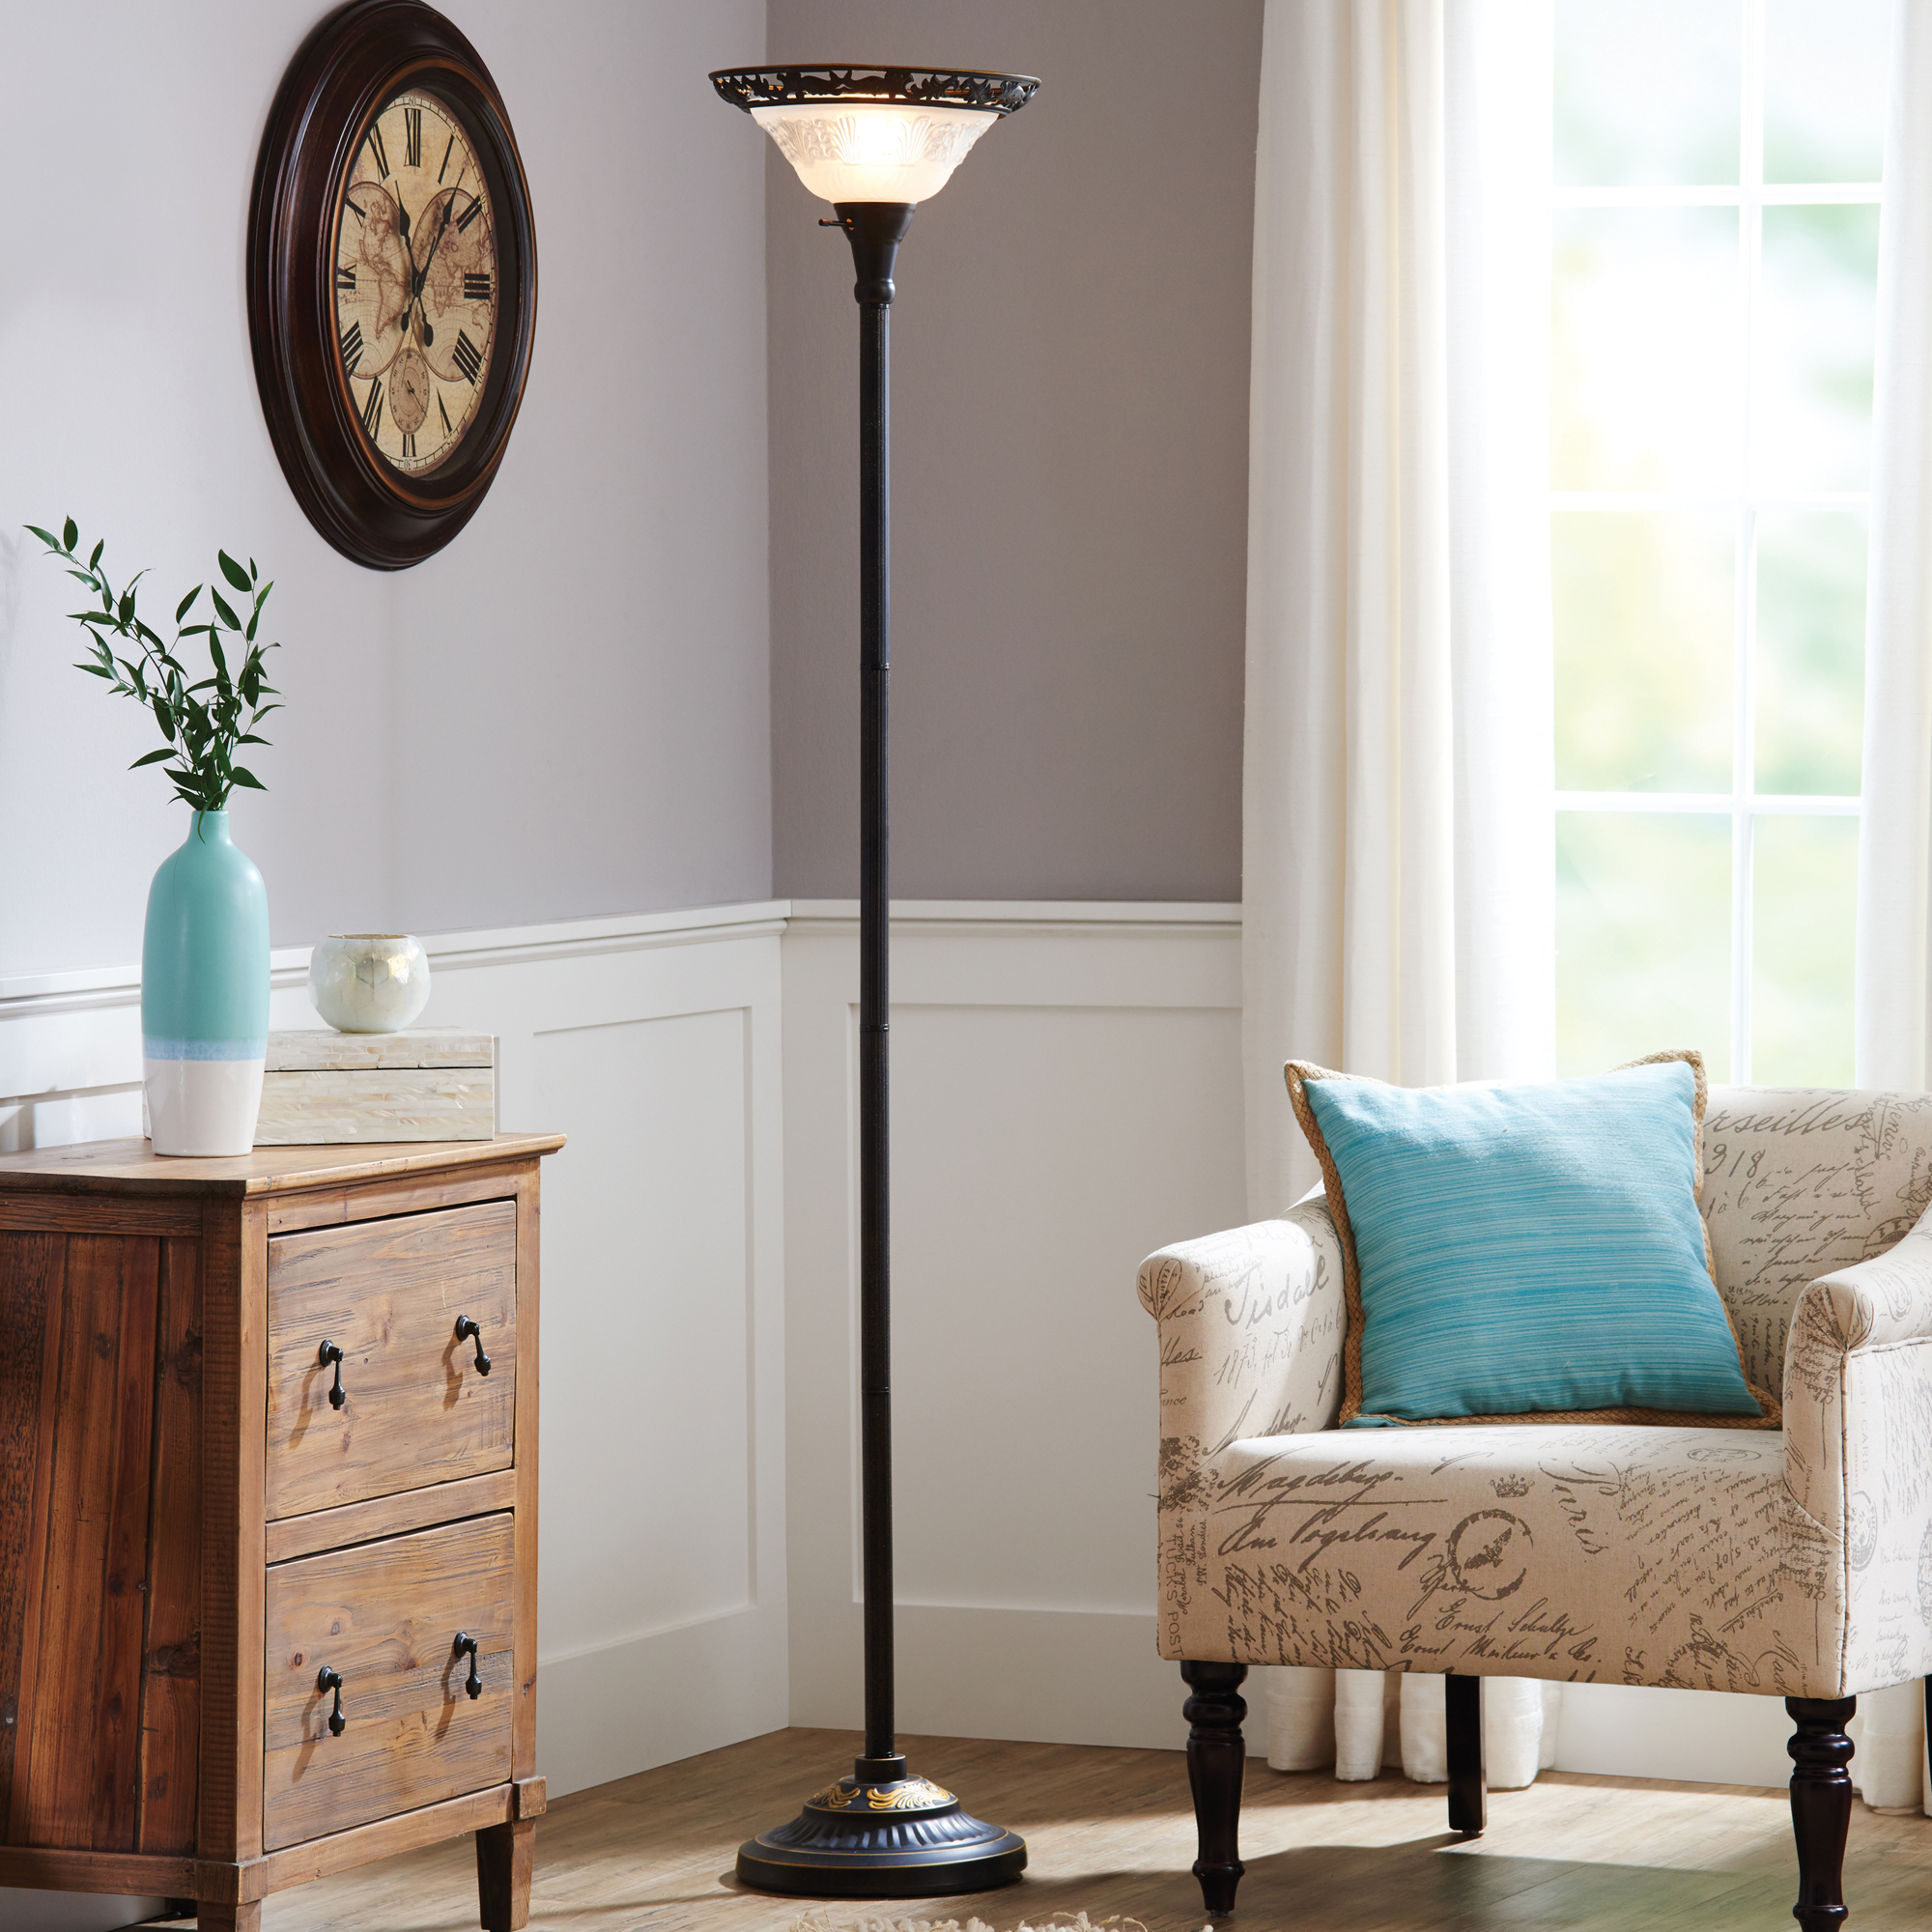 Better Homes & Gardnes Victorian Floor Lamp in Bronze Color 70"H, Metal Material with LED Bulb Included - image 5 of 7